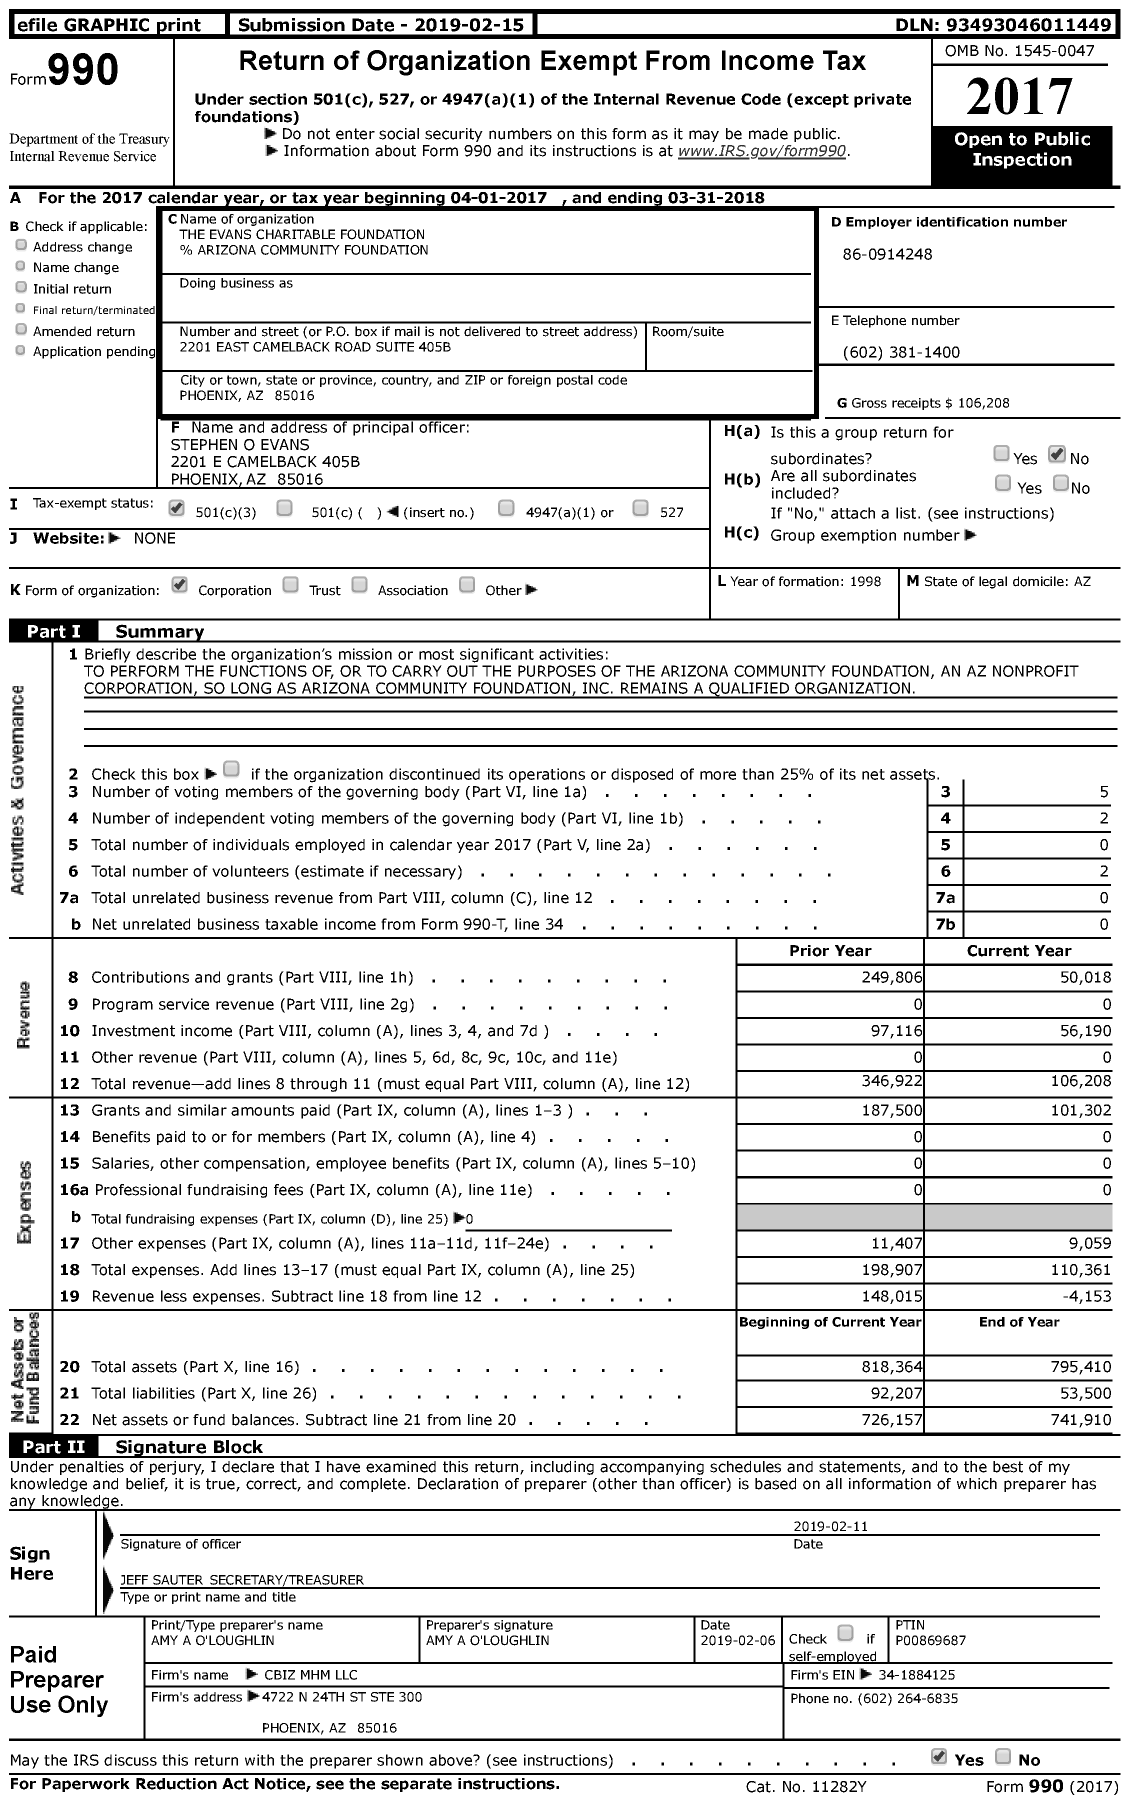 Image of first page of 2017 Form 990 for Evans Charitable Foundation